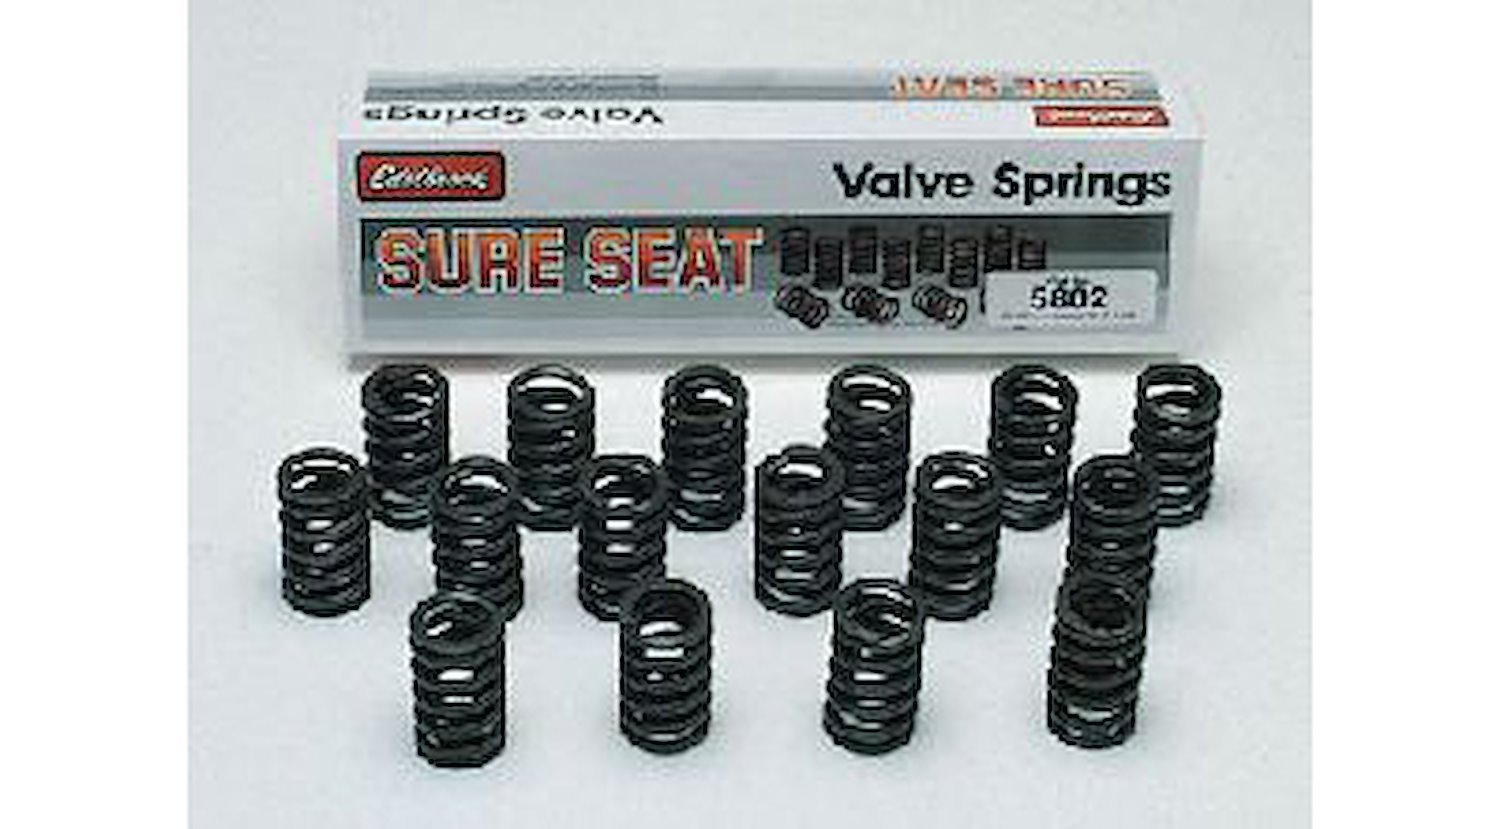 Sure Seat Valve Springs for 1967-84 Oldsmobile 330-455 OE Cast Iron Head